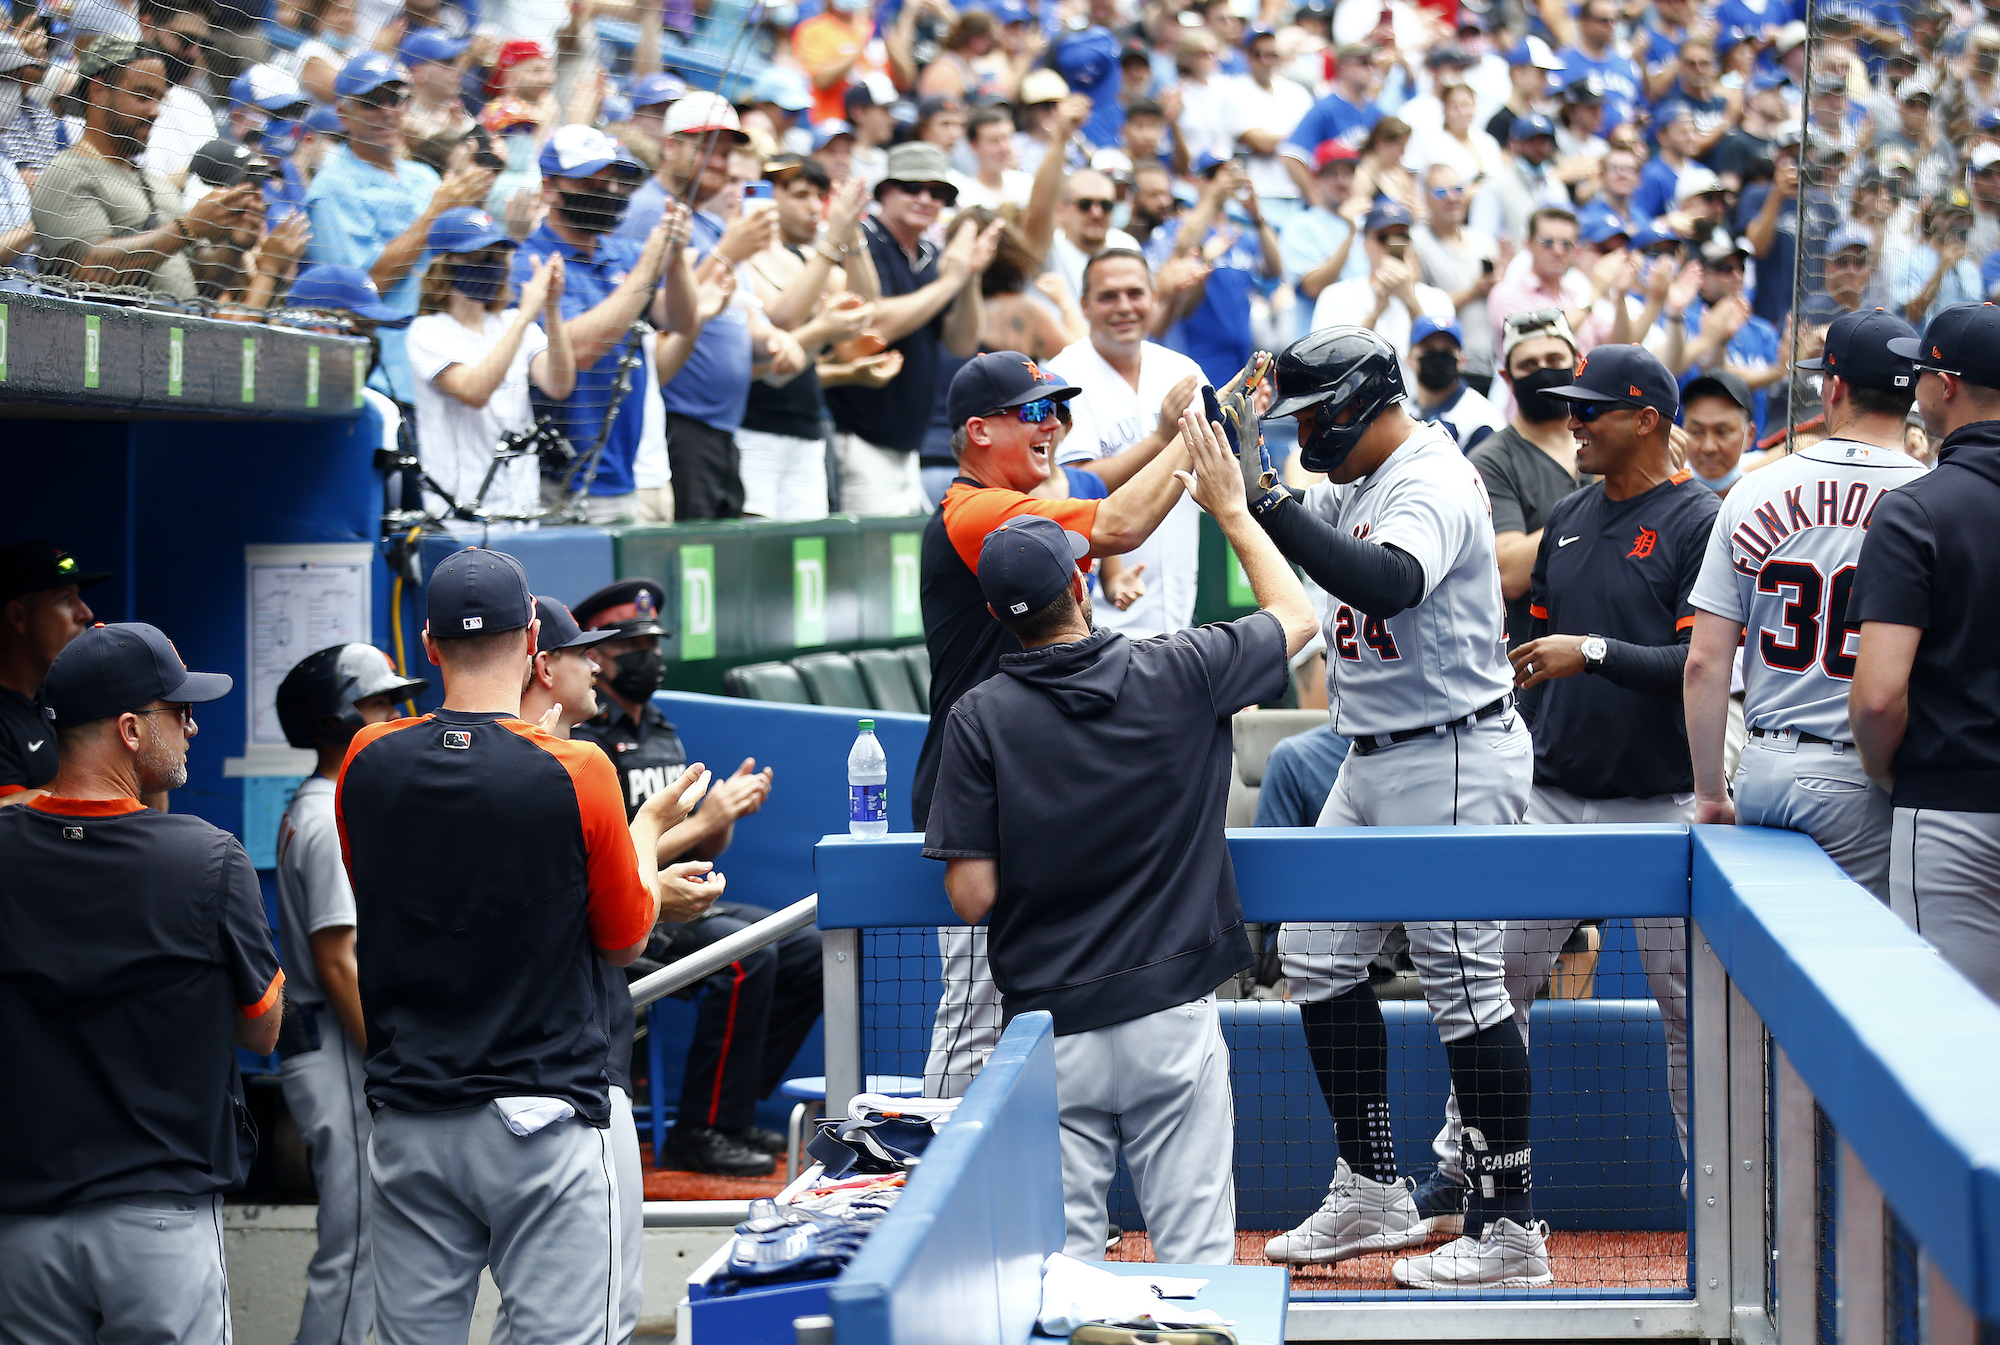 Miguel Cabrera #24 of the Detroit Tigers high fives Manager A.J. Hinch after hitting his 500th career home run in the sixth inning during a MLB game against the Toronto Blue Jays at Rogers Centre on August 22, 2021 in Toronto, Ontario, Canada.